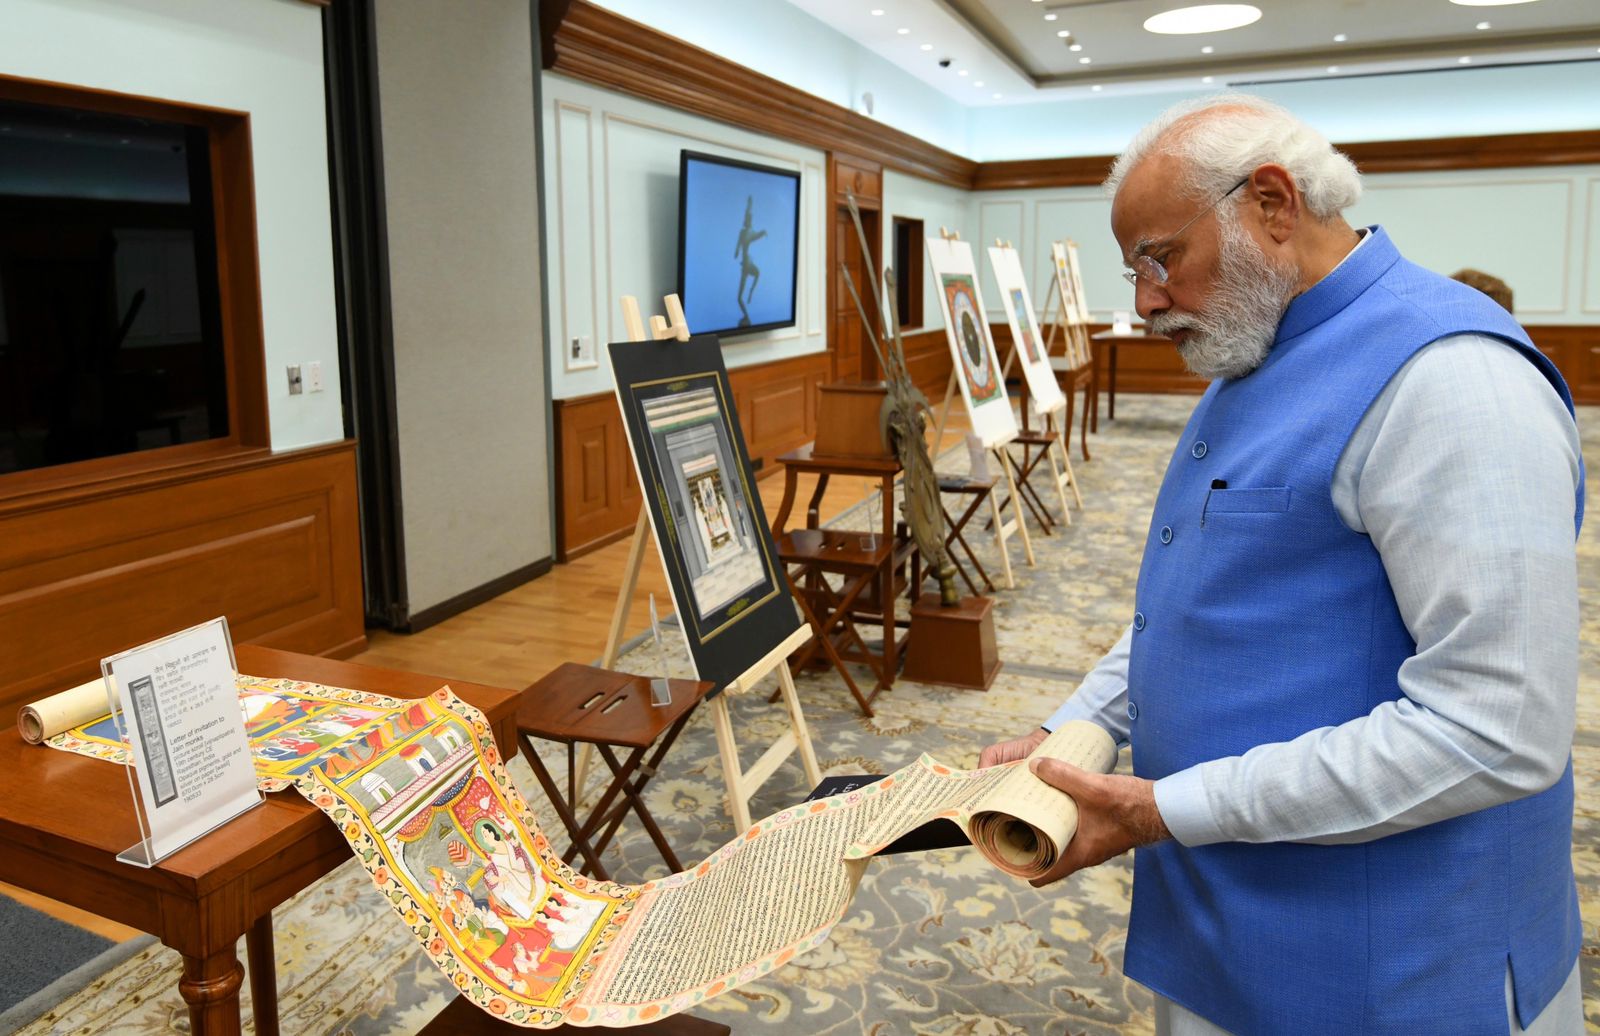 PM Modi inspects 29 antiquities repatriated to India by Australia (Pics/Videos)